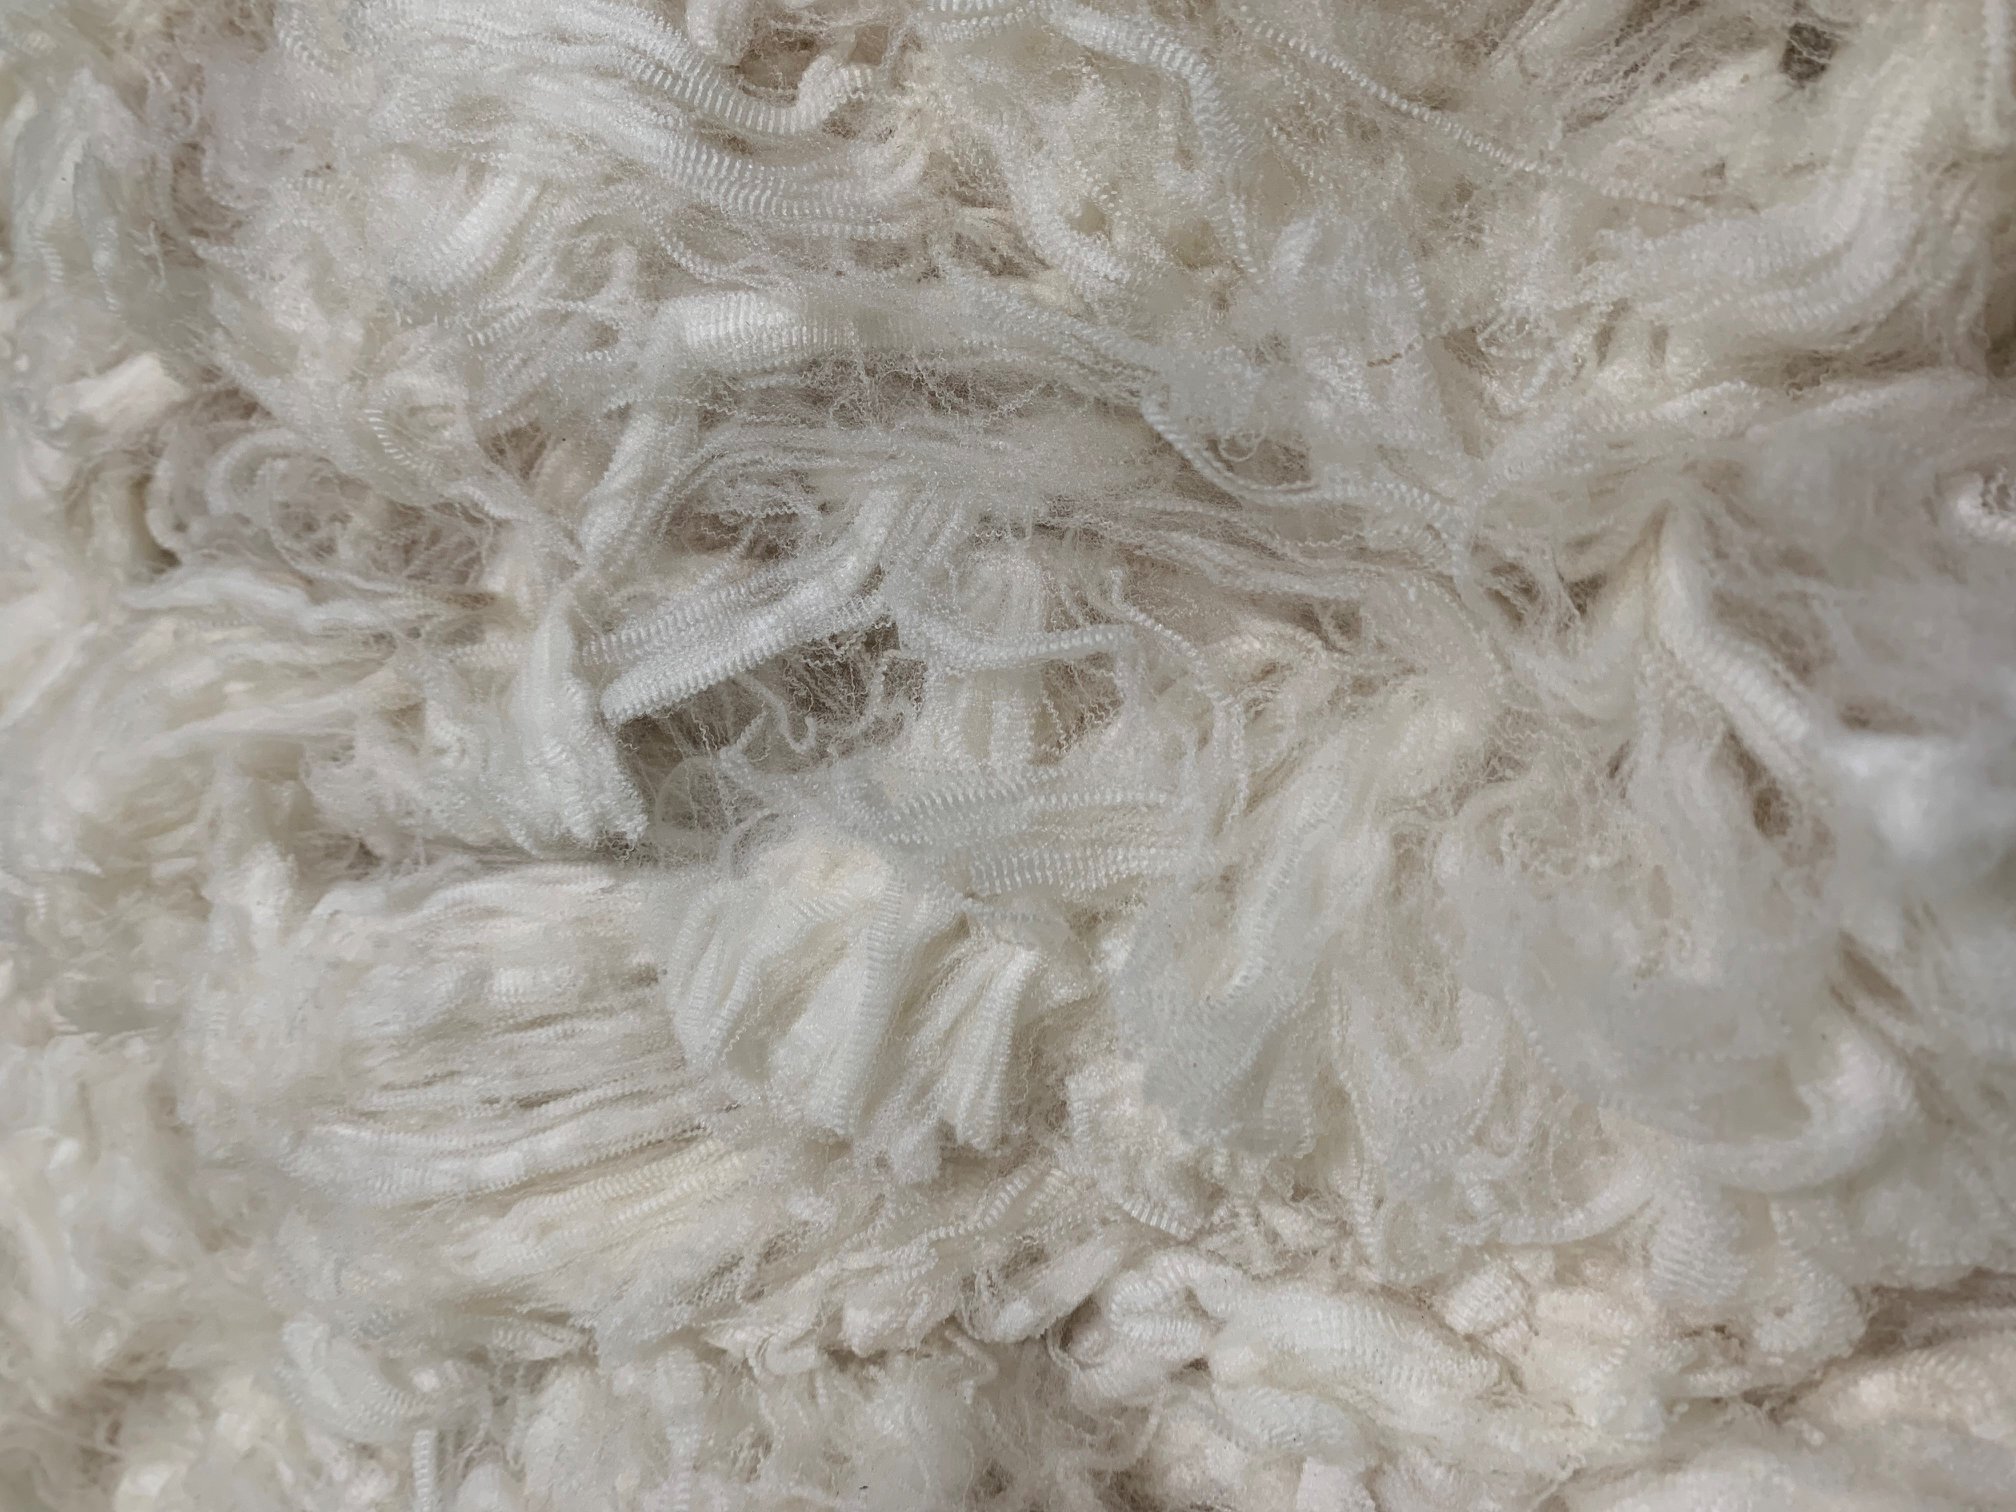 Merino wool prices to soften, but no sharp drop expected - Sheep Central